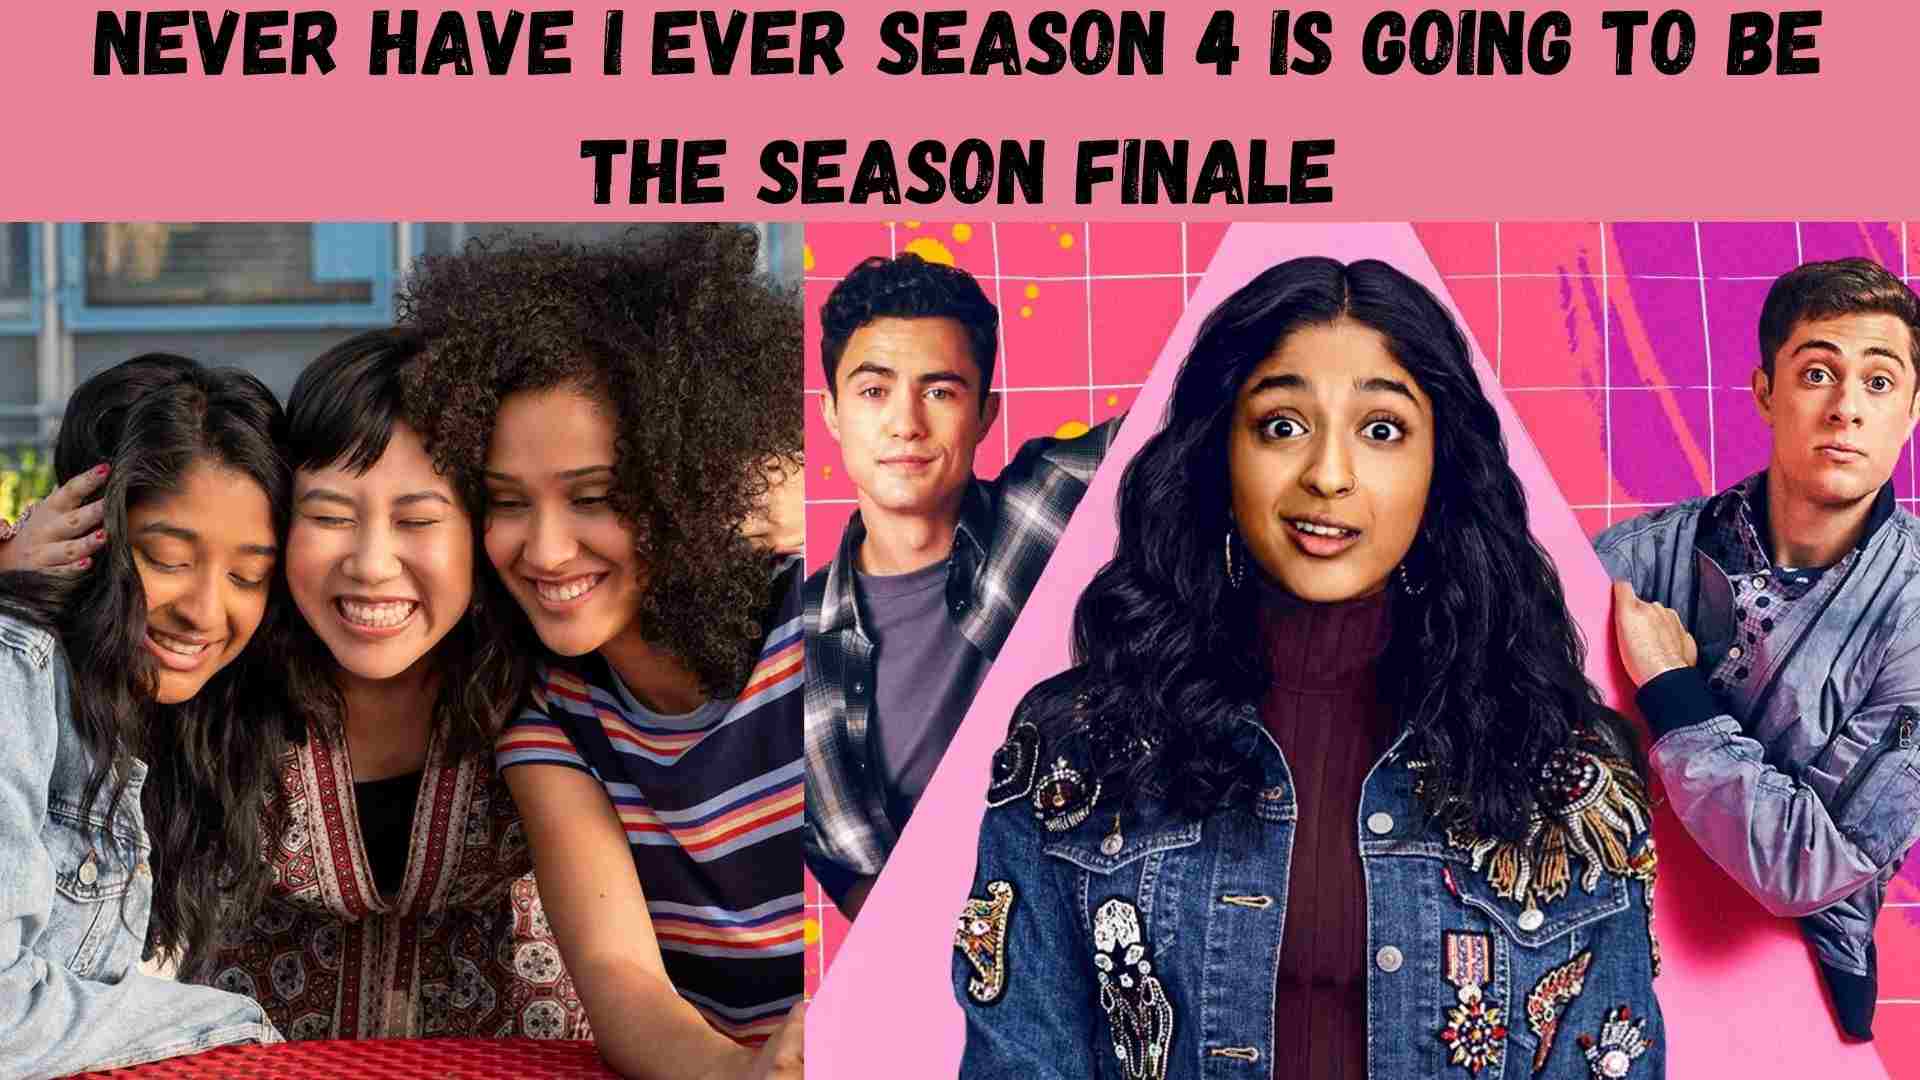 Never Have I Ever Season 4 is going to be the season finale wallpaper and images